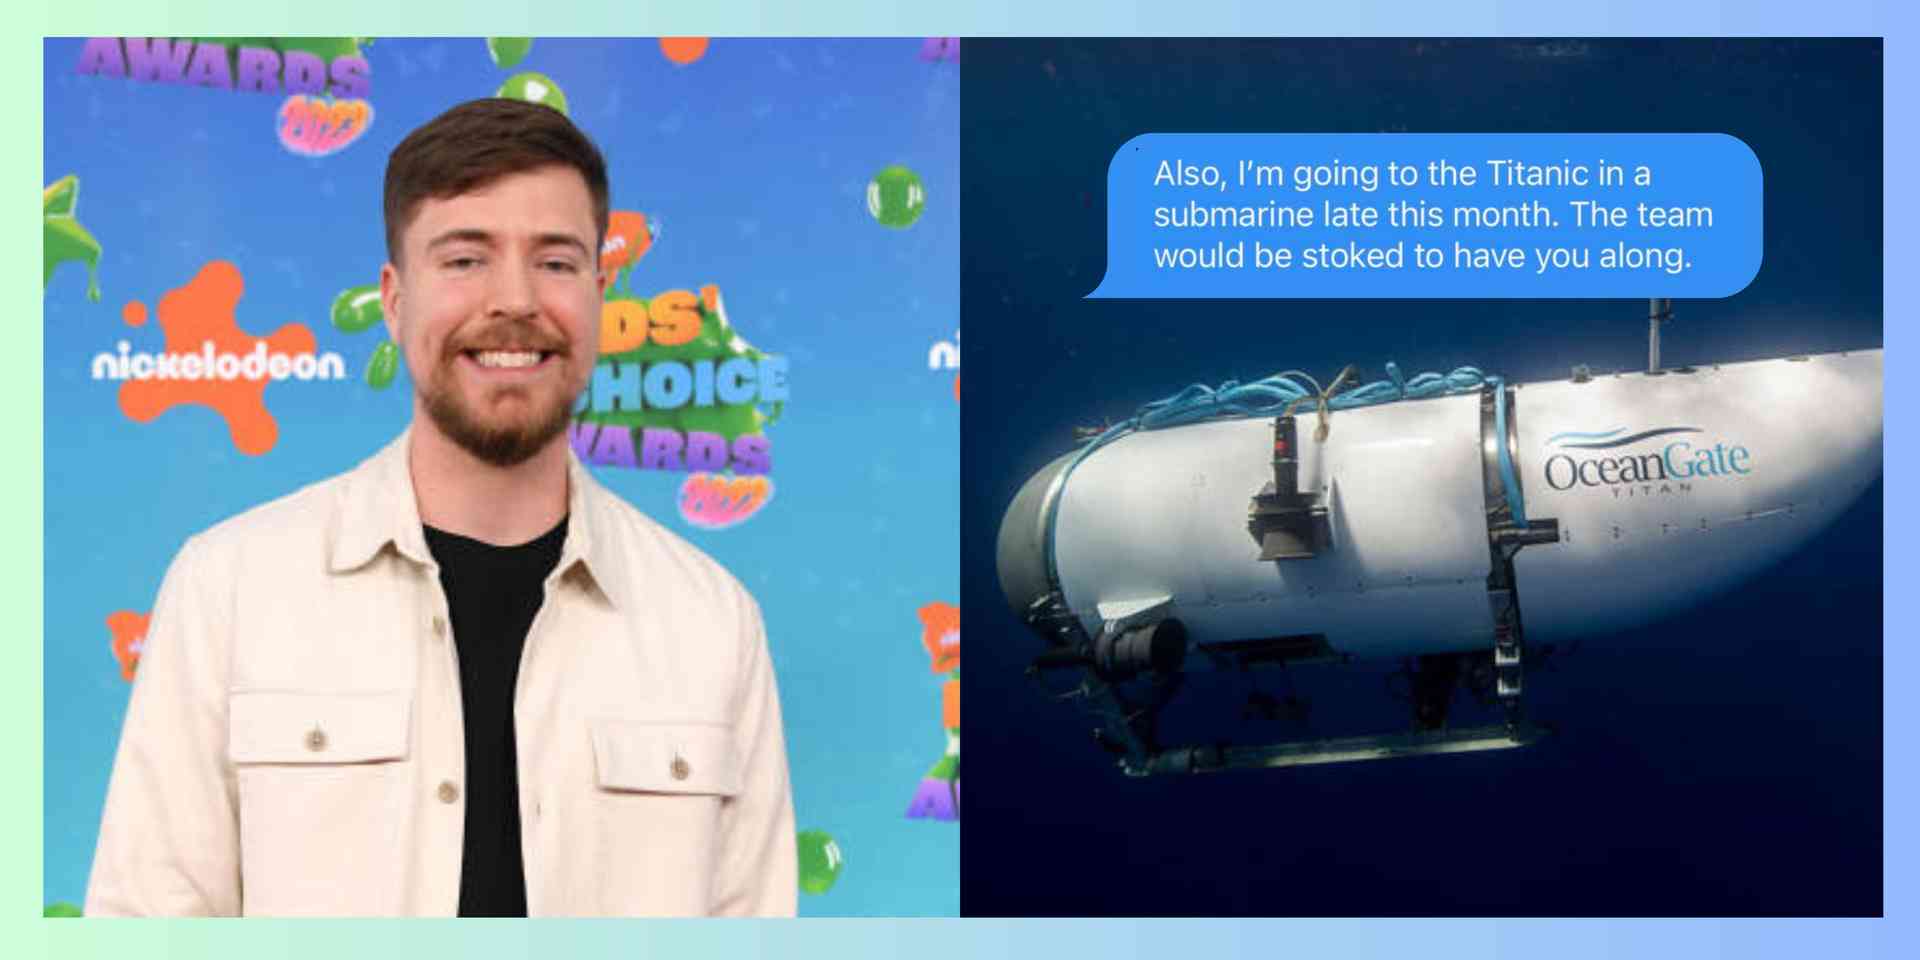 MrBeast reveals: "I was invited to join Titan submersible trip"